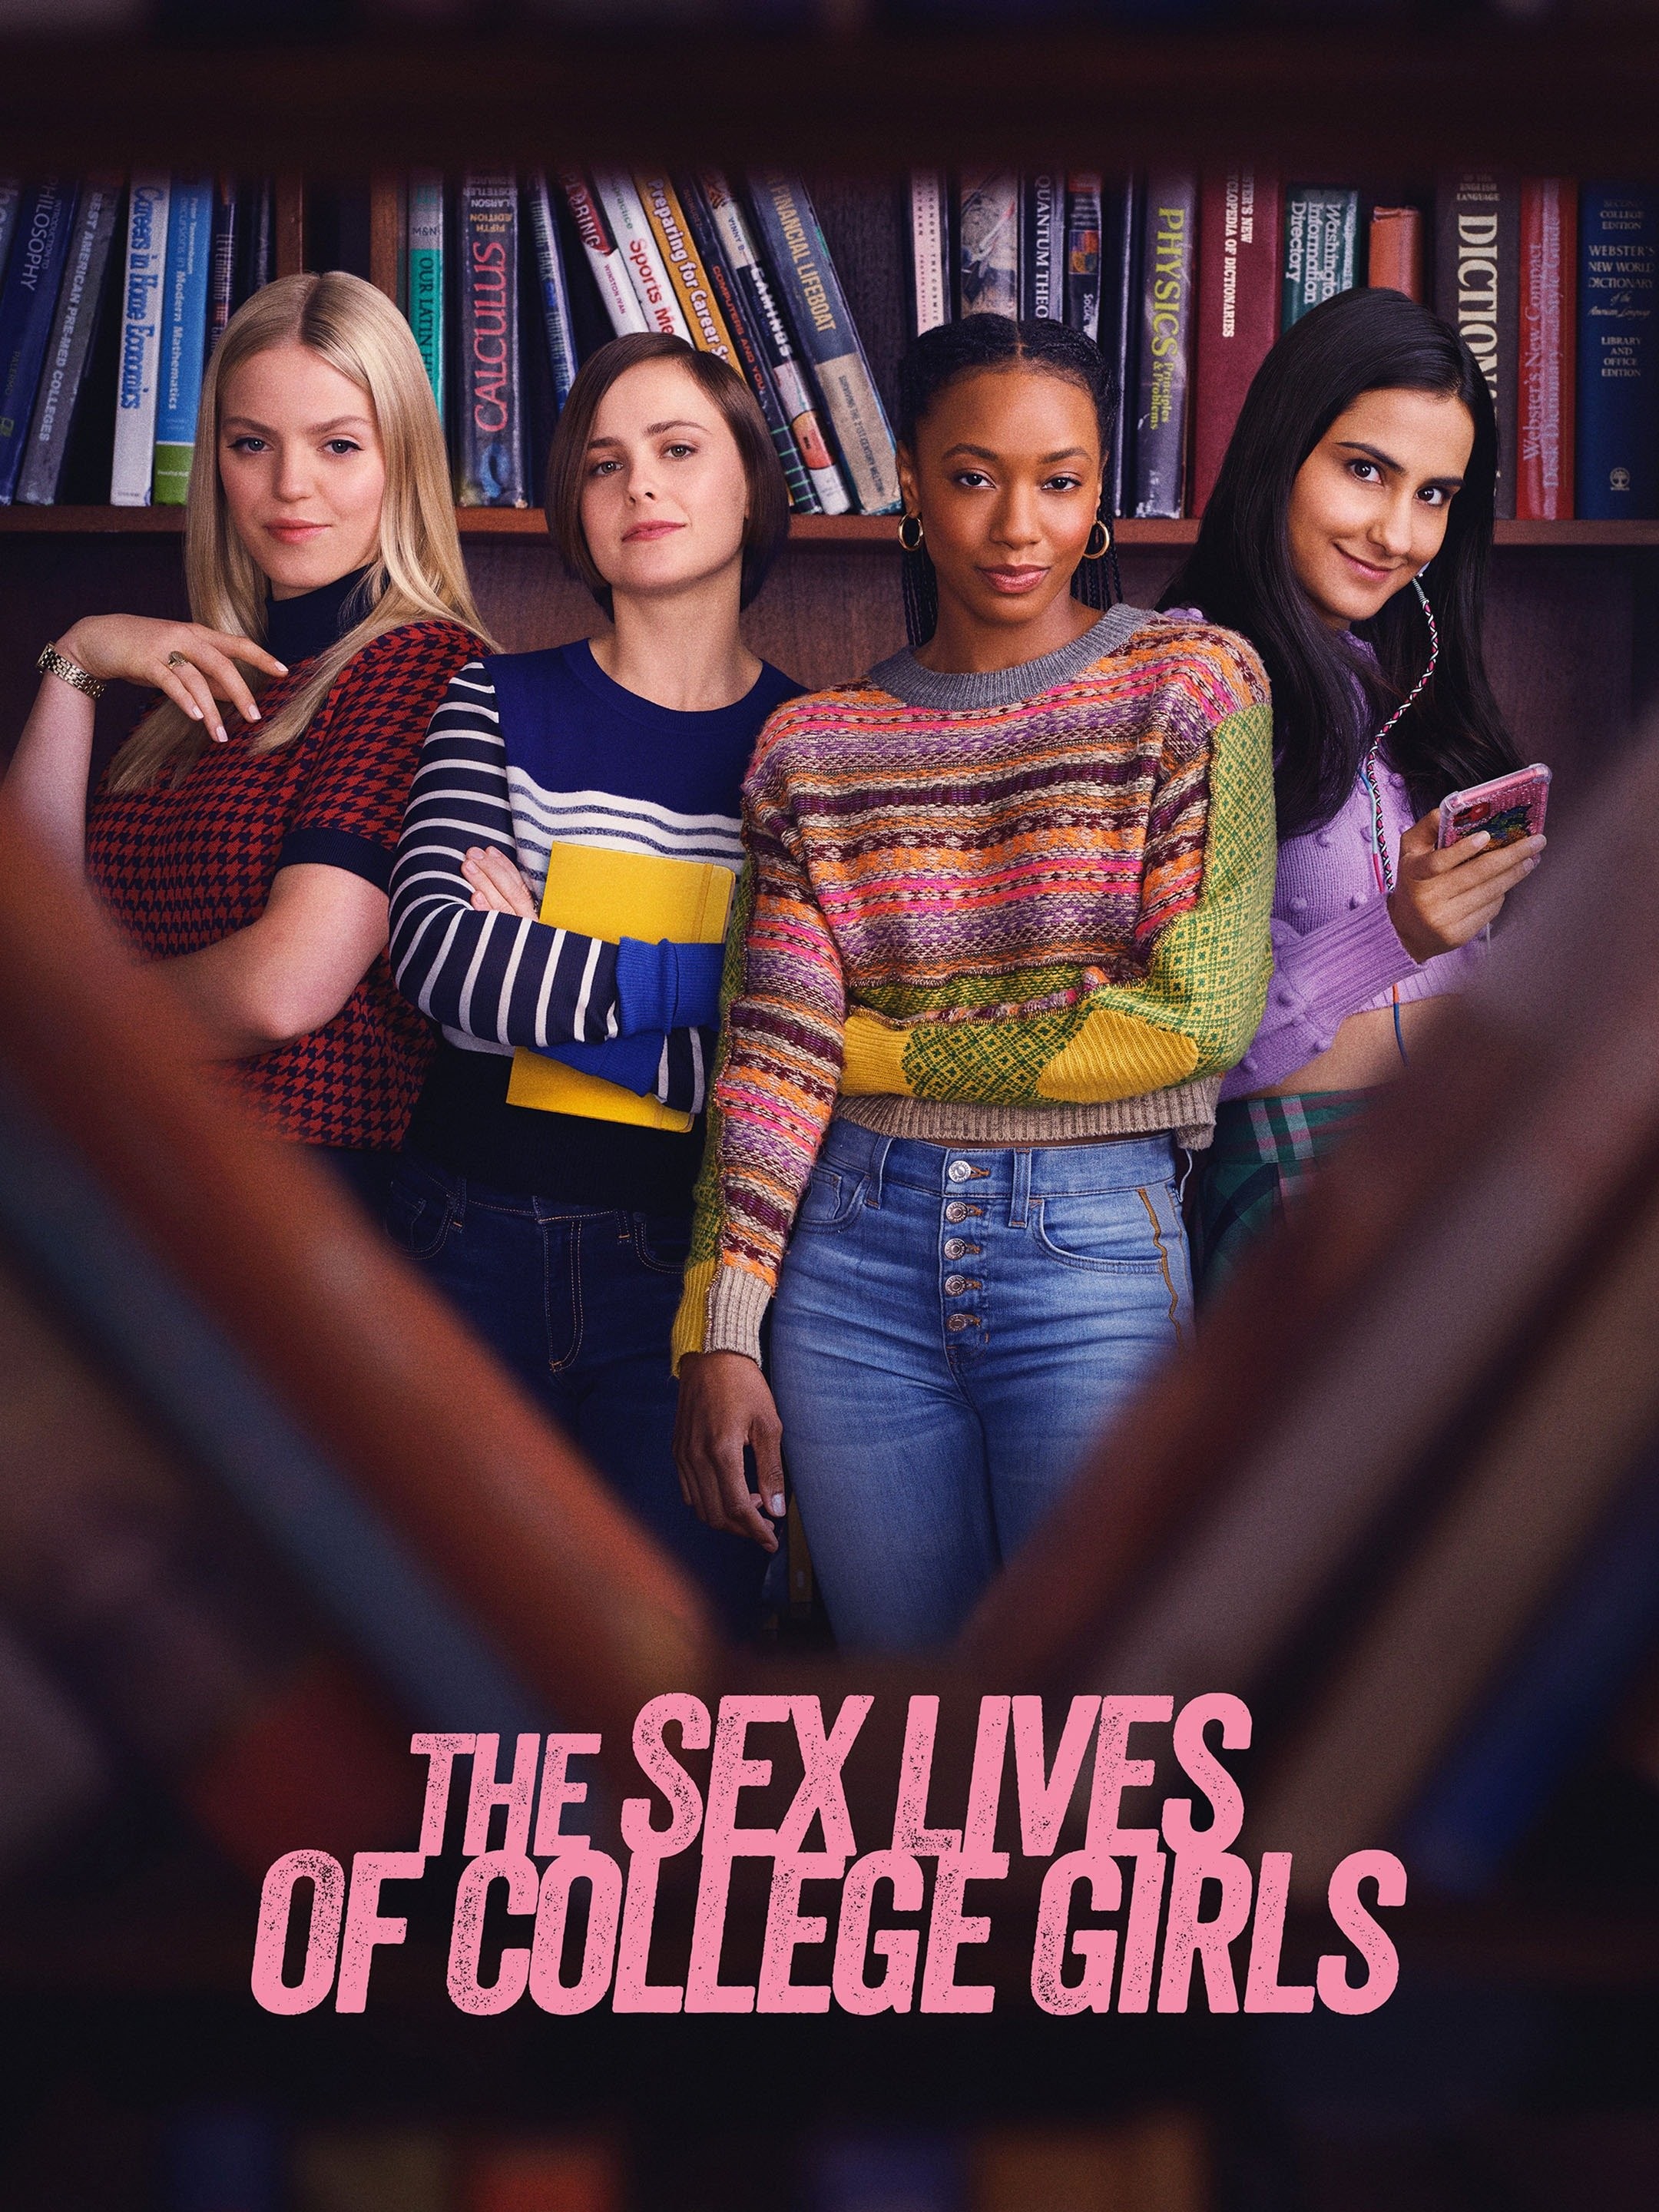 Girls Main Class And Doing Xxx - The Sex Lives of College Girls - Rotten Tomatoes